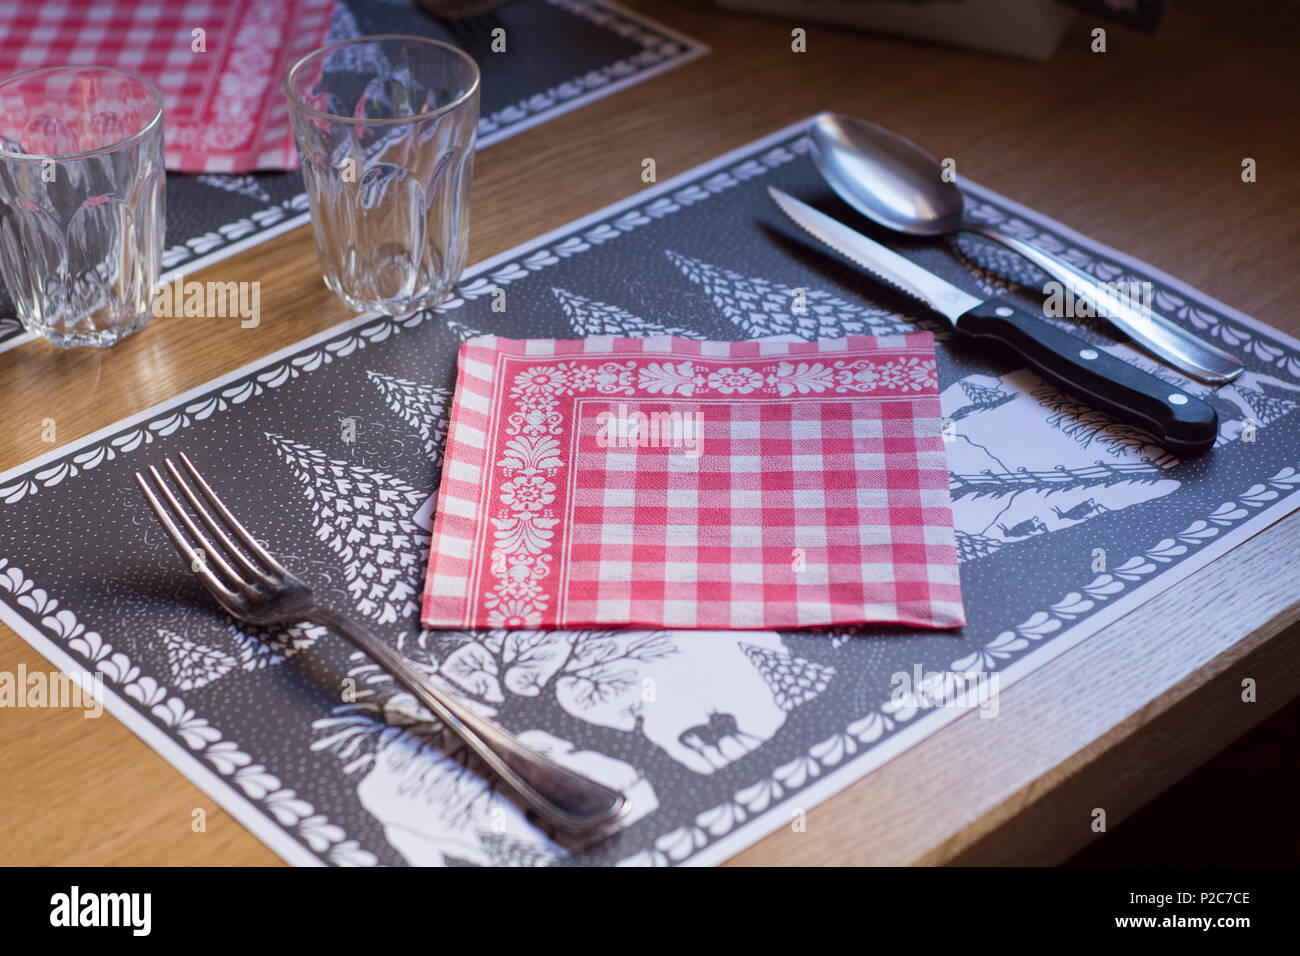 A typically Swiss place setting, Diablerets Hut, Vaud Alps, canton of Vaud, Switzerland Stock Photo